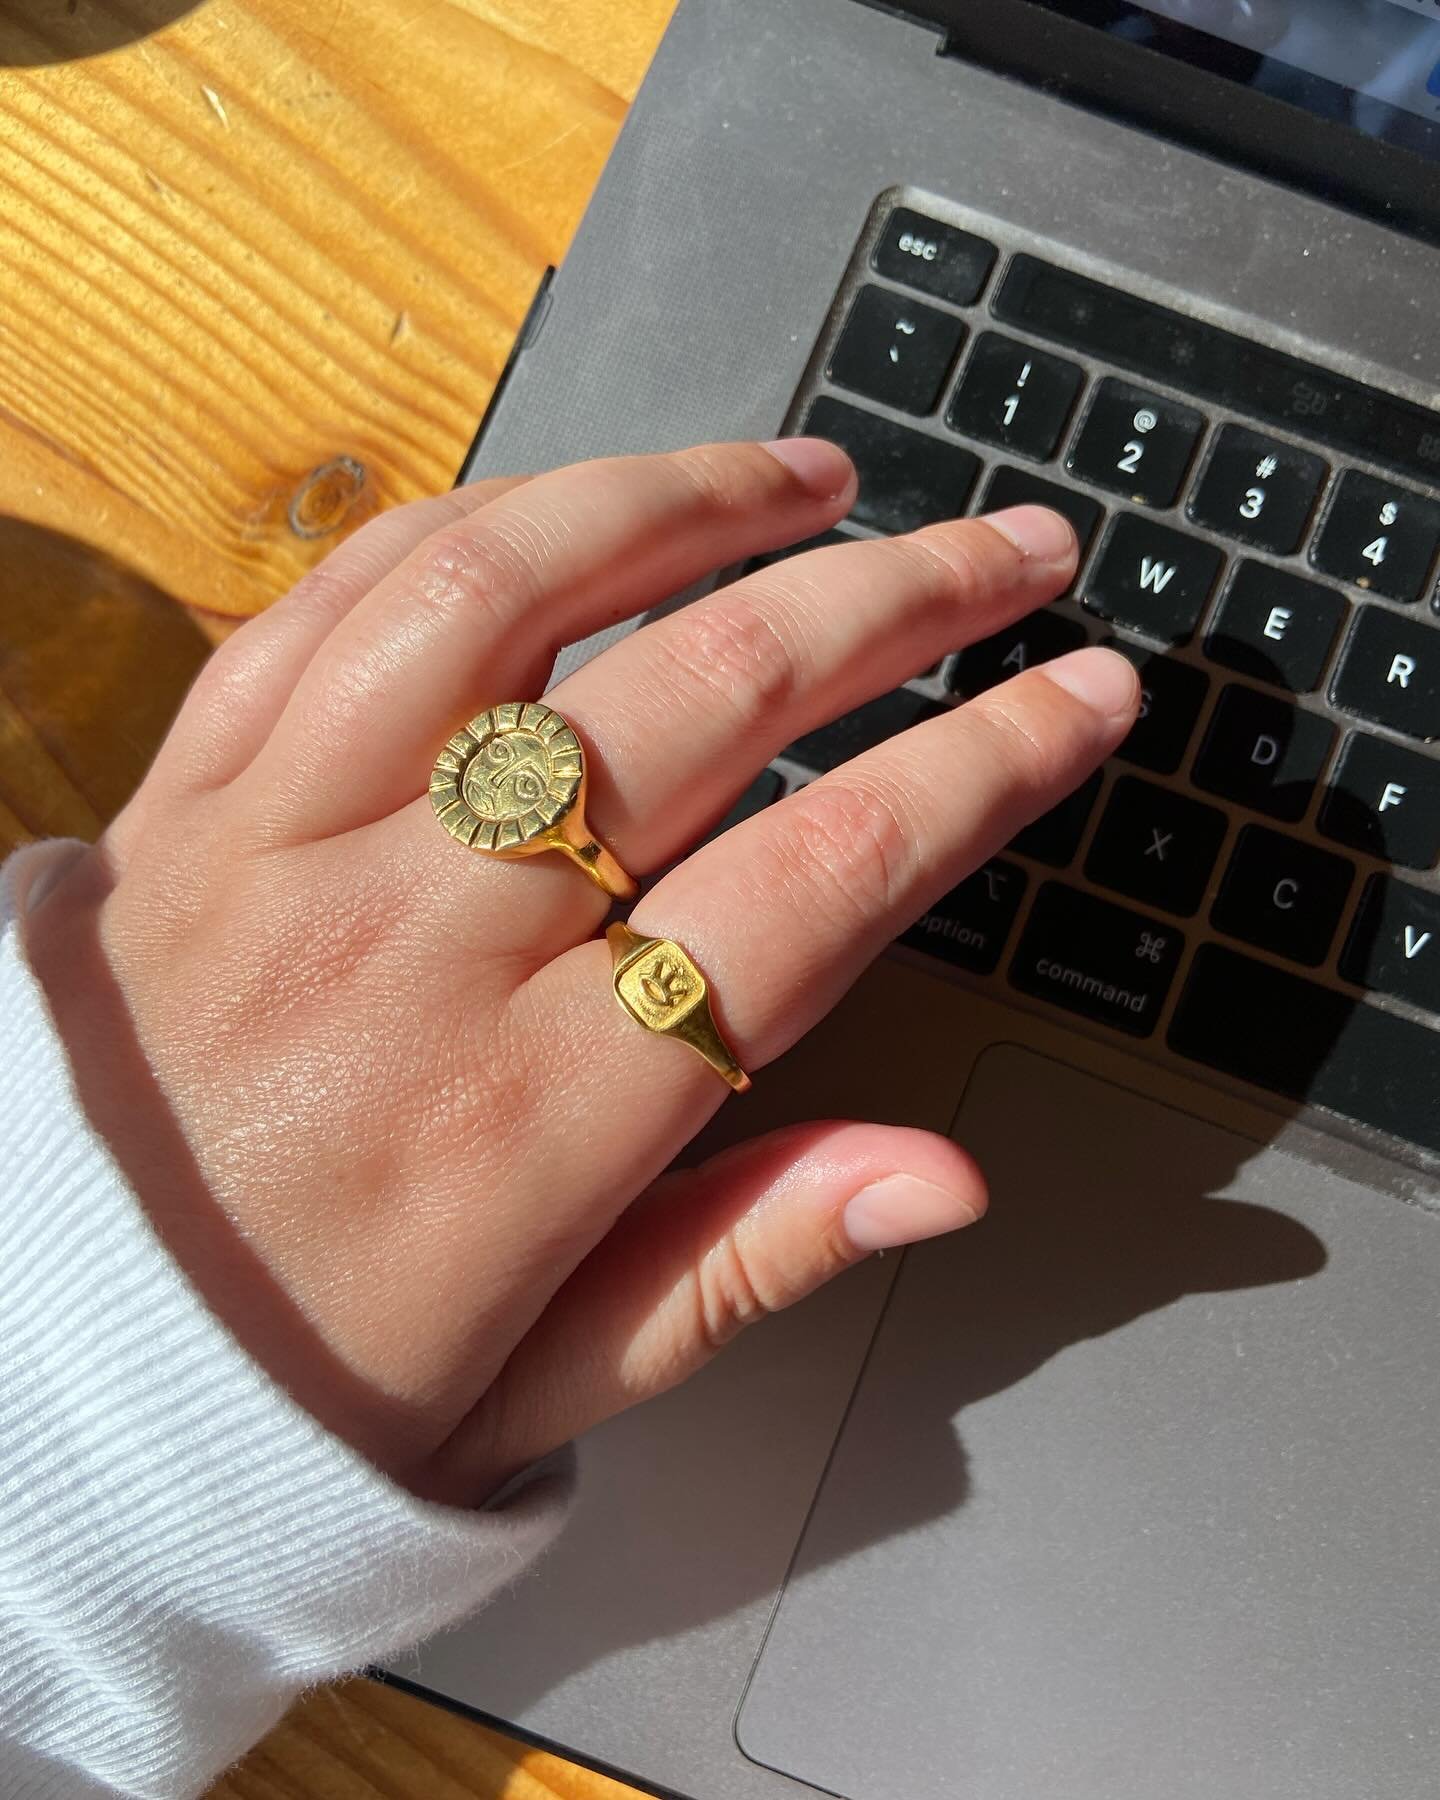 Things from my camera roll&hellip; 1. 🌞 my fave gold ring stack @rauwjewelry + @zaleskajewelry. 2. the river🌲 3. working on my new layout design course 😎 4. re-watching Hart of Dixie after I found it in my Apple account&hellip; omg it&rsquo;s so g